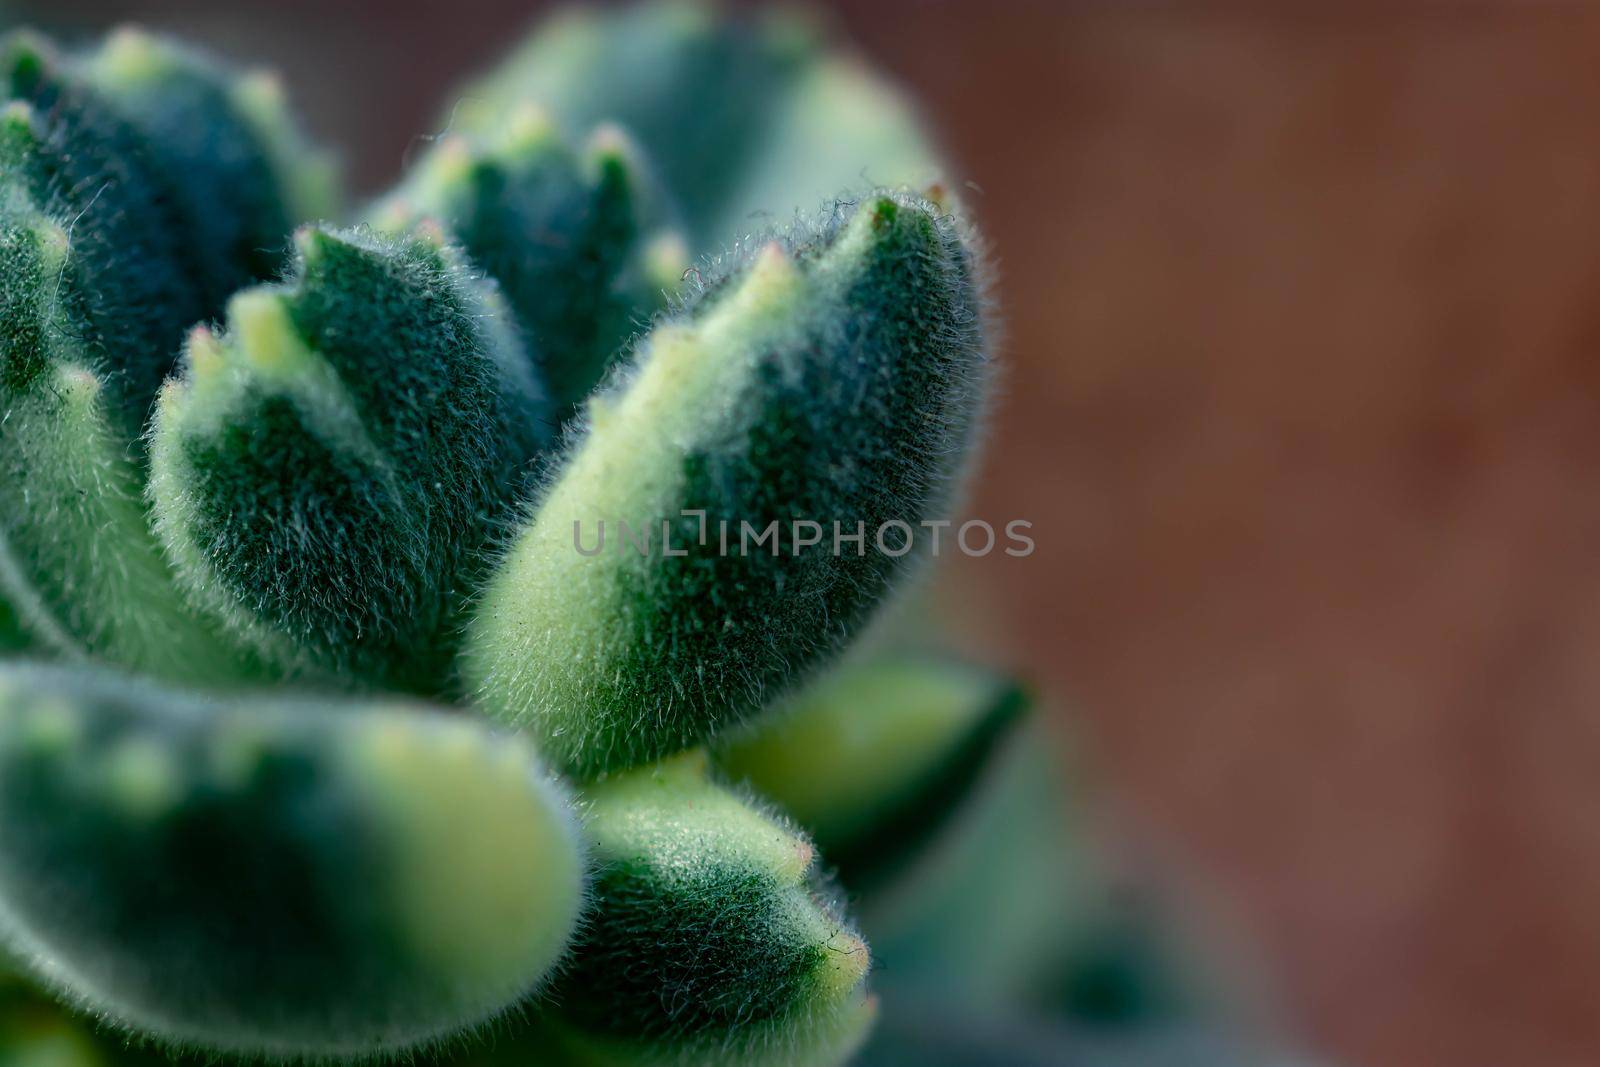 Macro shot of a green cacti or cactus and its thorns or spines in a flower garden in Singapore